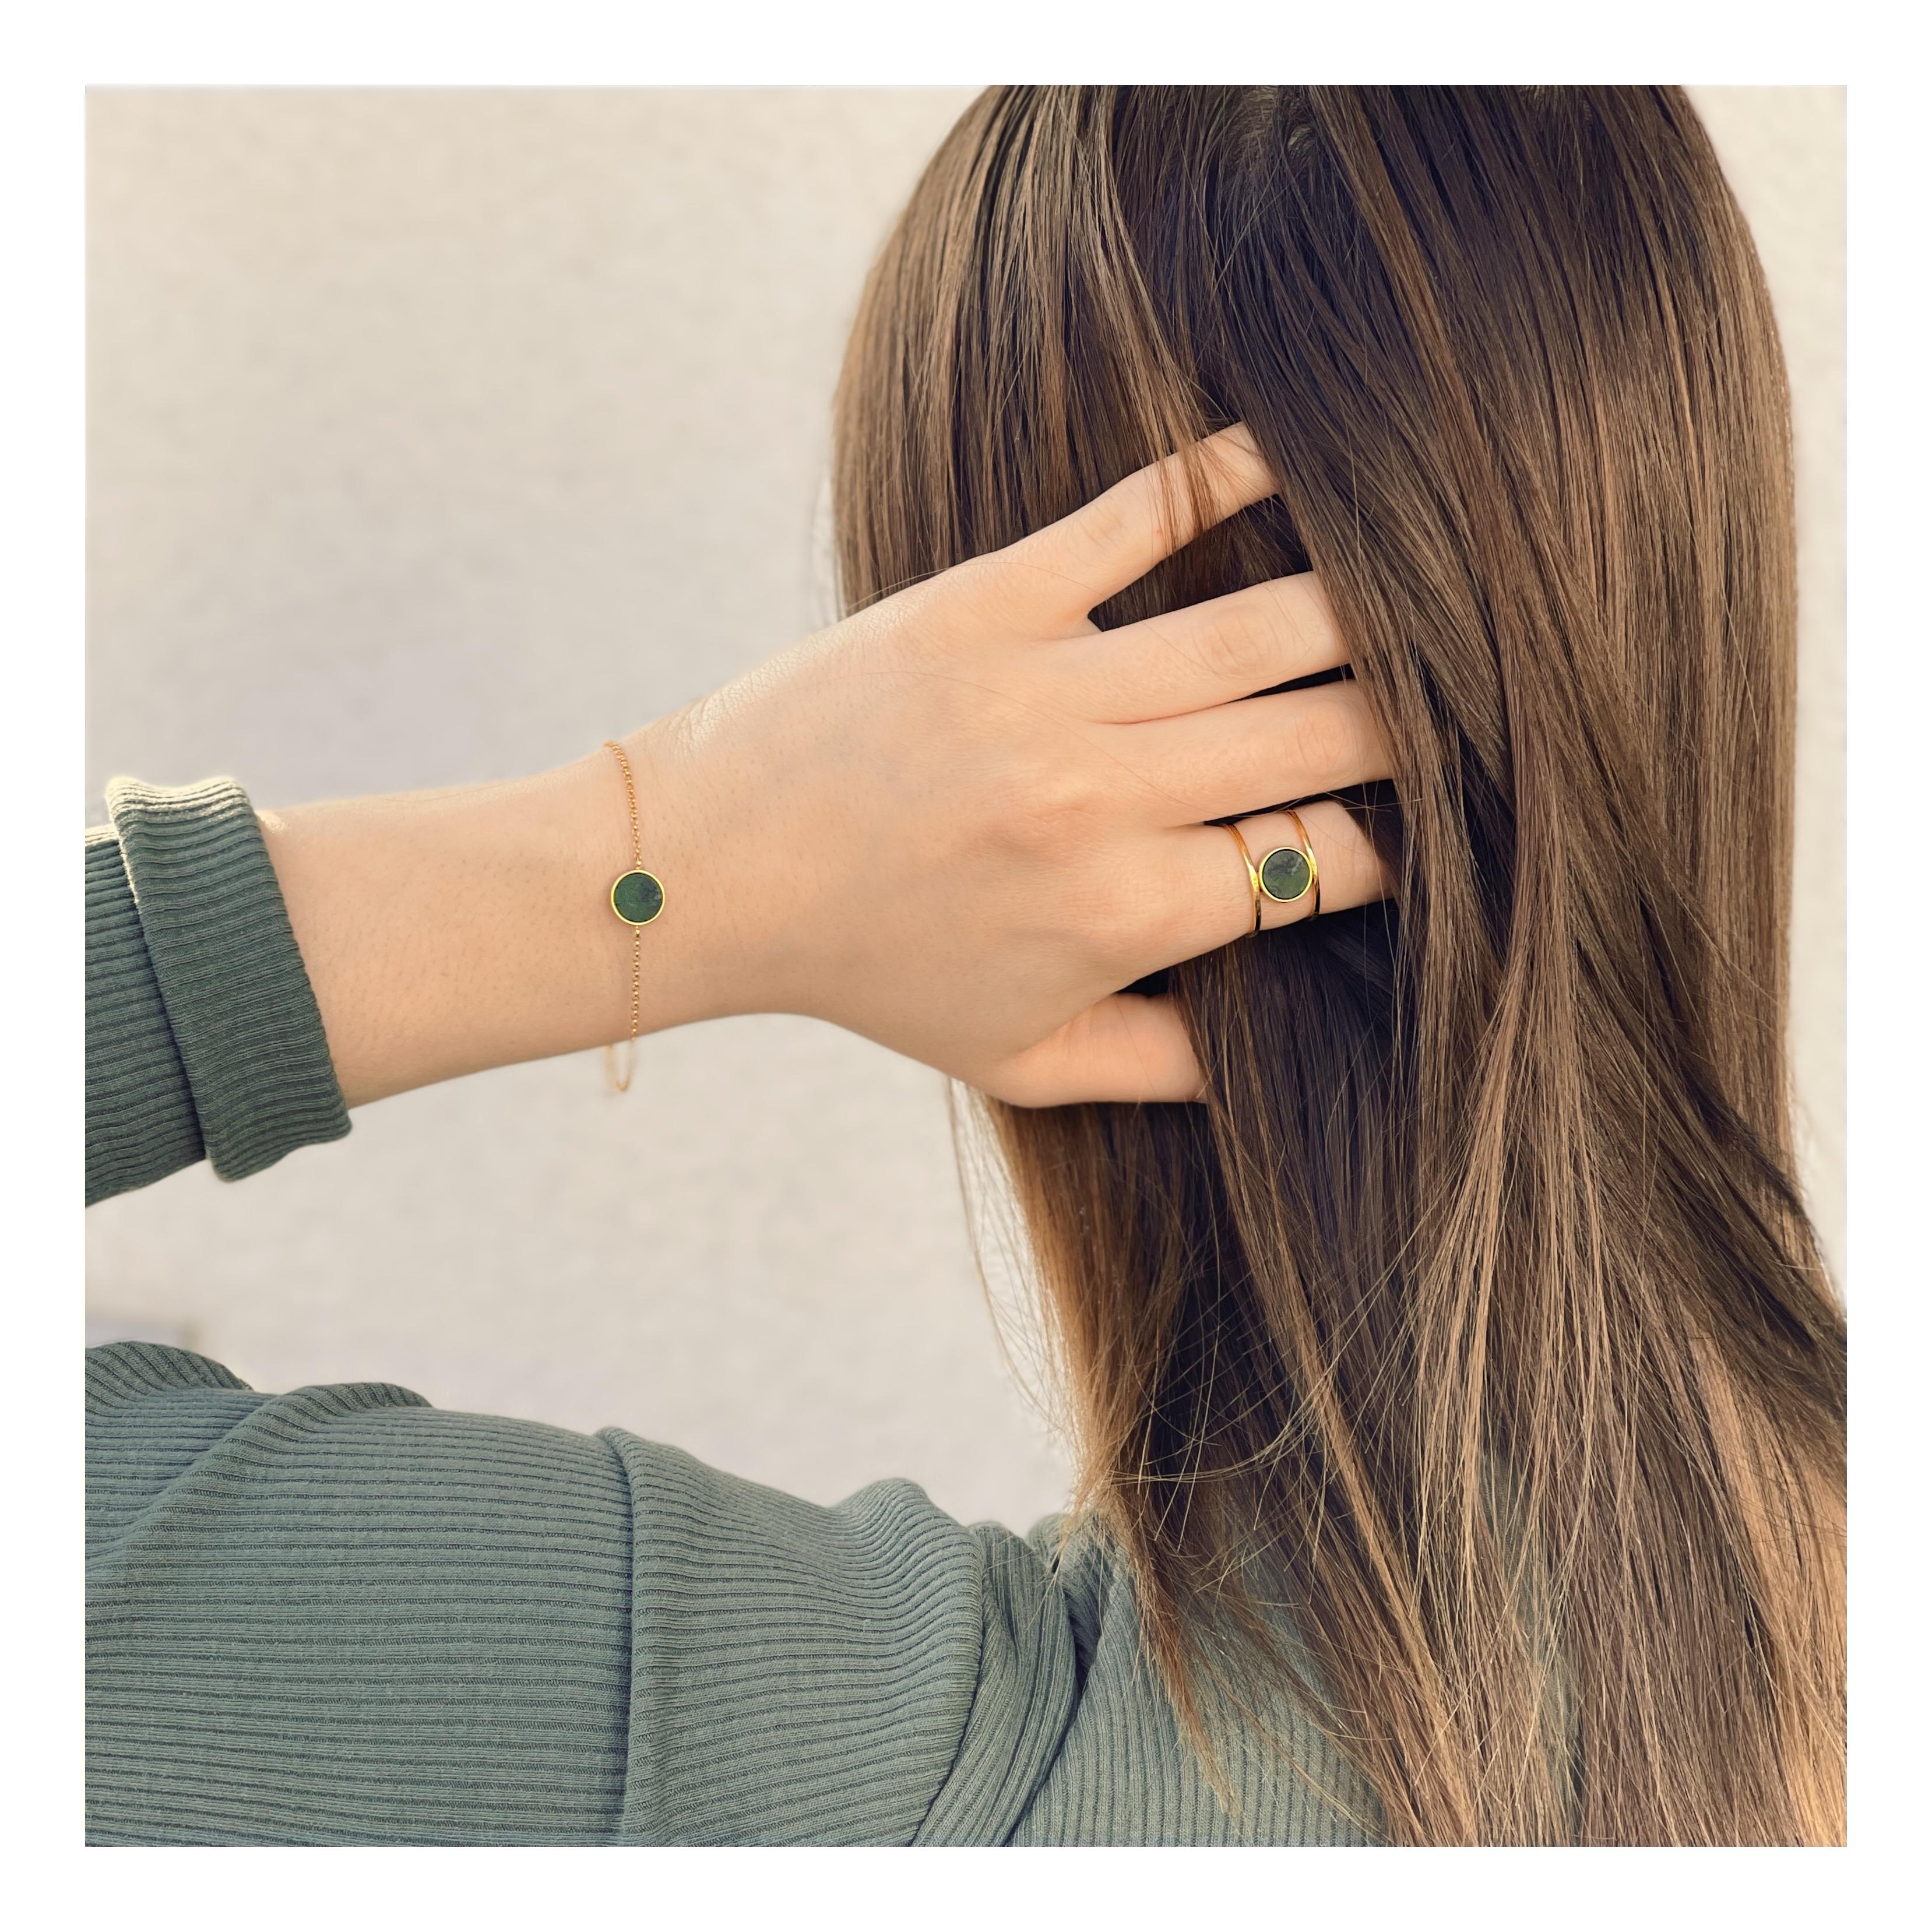 This bracelet with a dark green stone on a delicate gold chain will be a beautiful adornment for your wrist. Its minimalist design means you can wear it with practically any outfit. It will be perfect for both elegant outings and meetings with